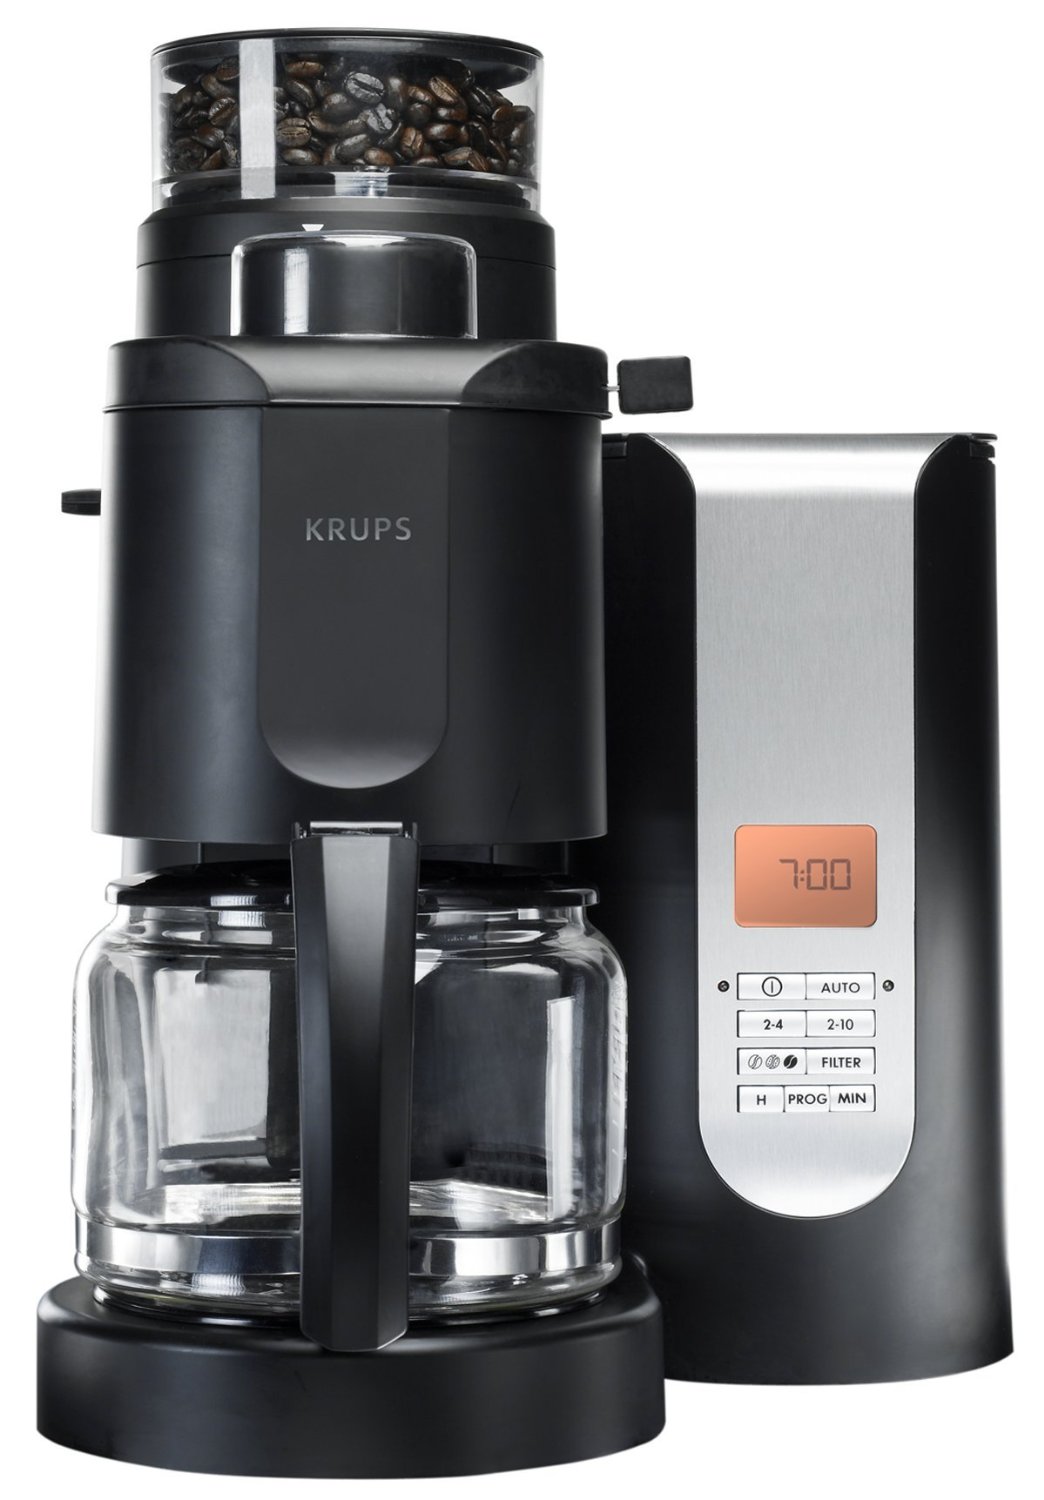 KRUPS KM7000 10-Cup Grind and Brew Coffee Maker   $106.46